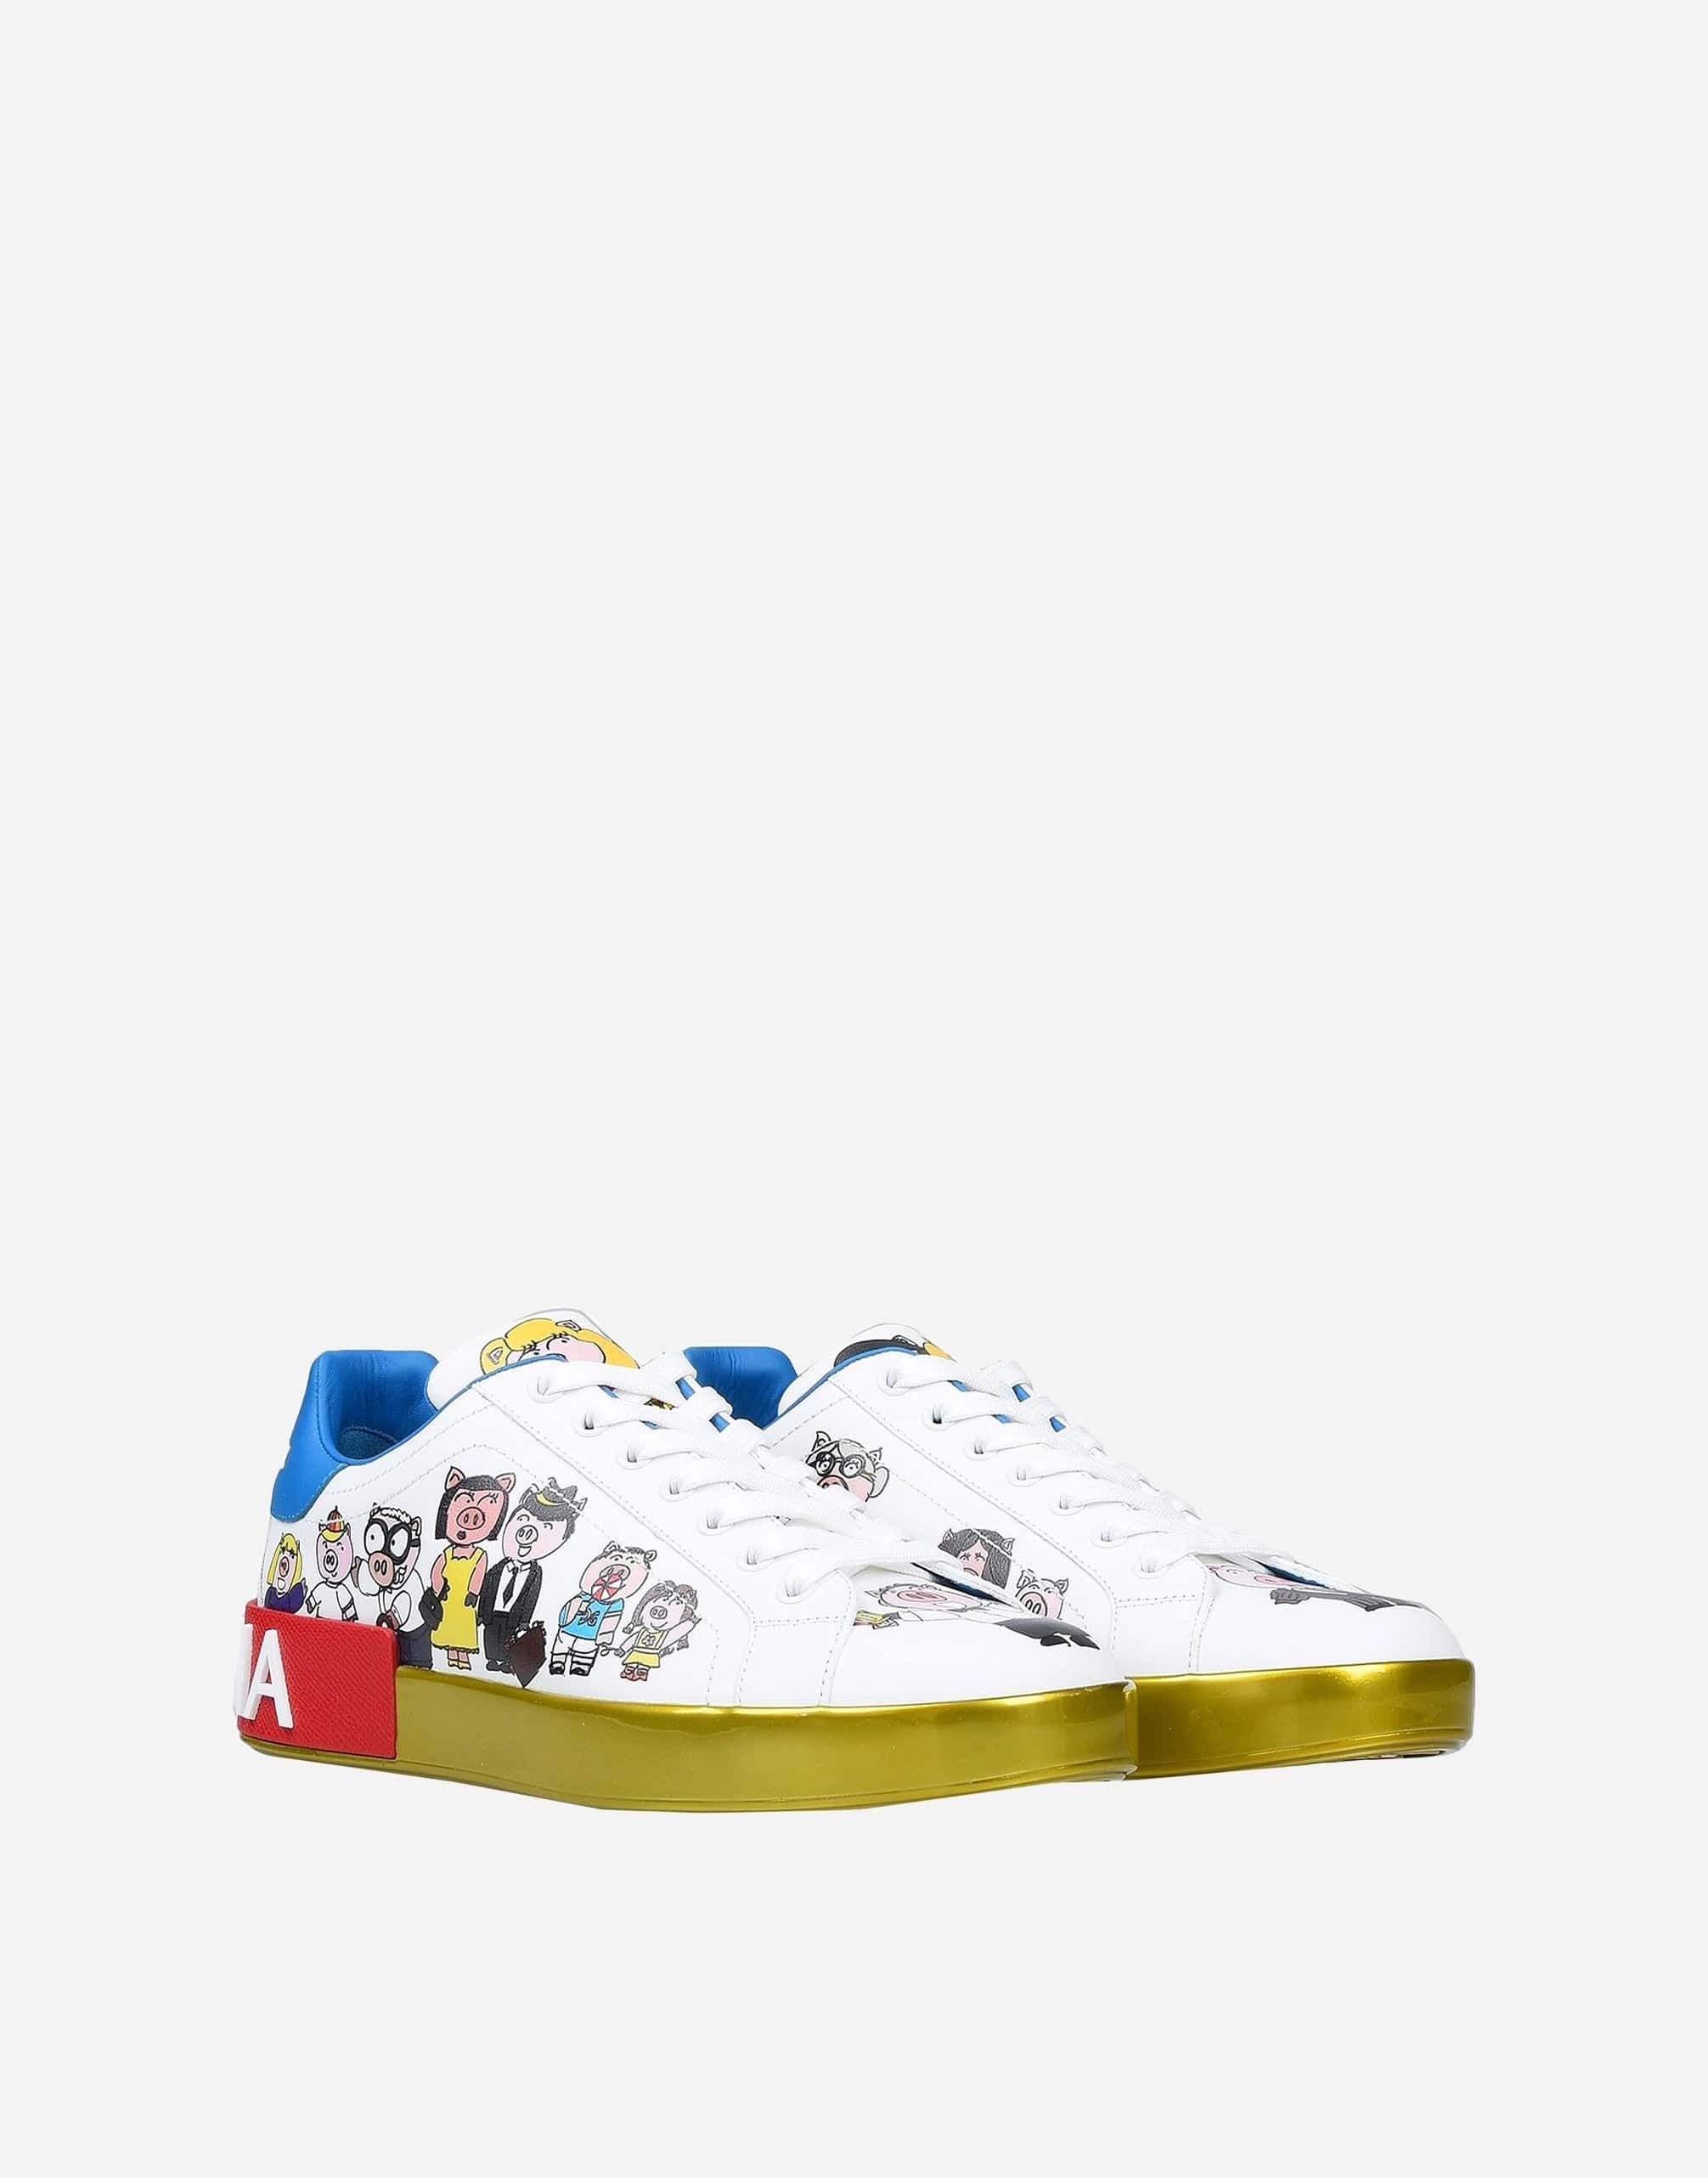 Dolce & Gabbana Leather Pig Family Sneakers